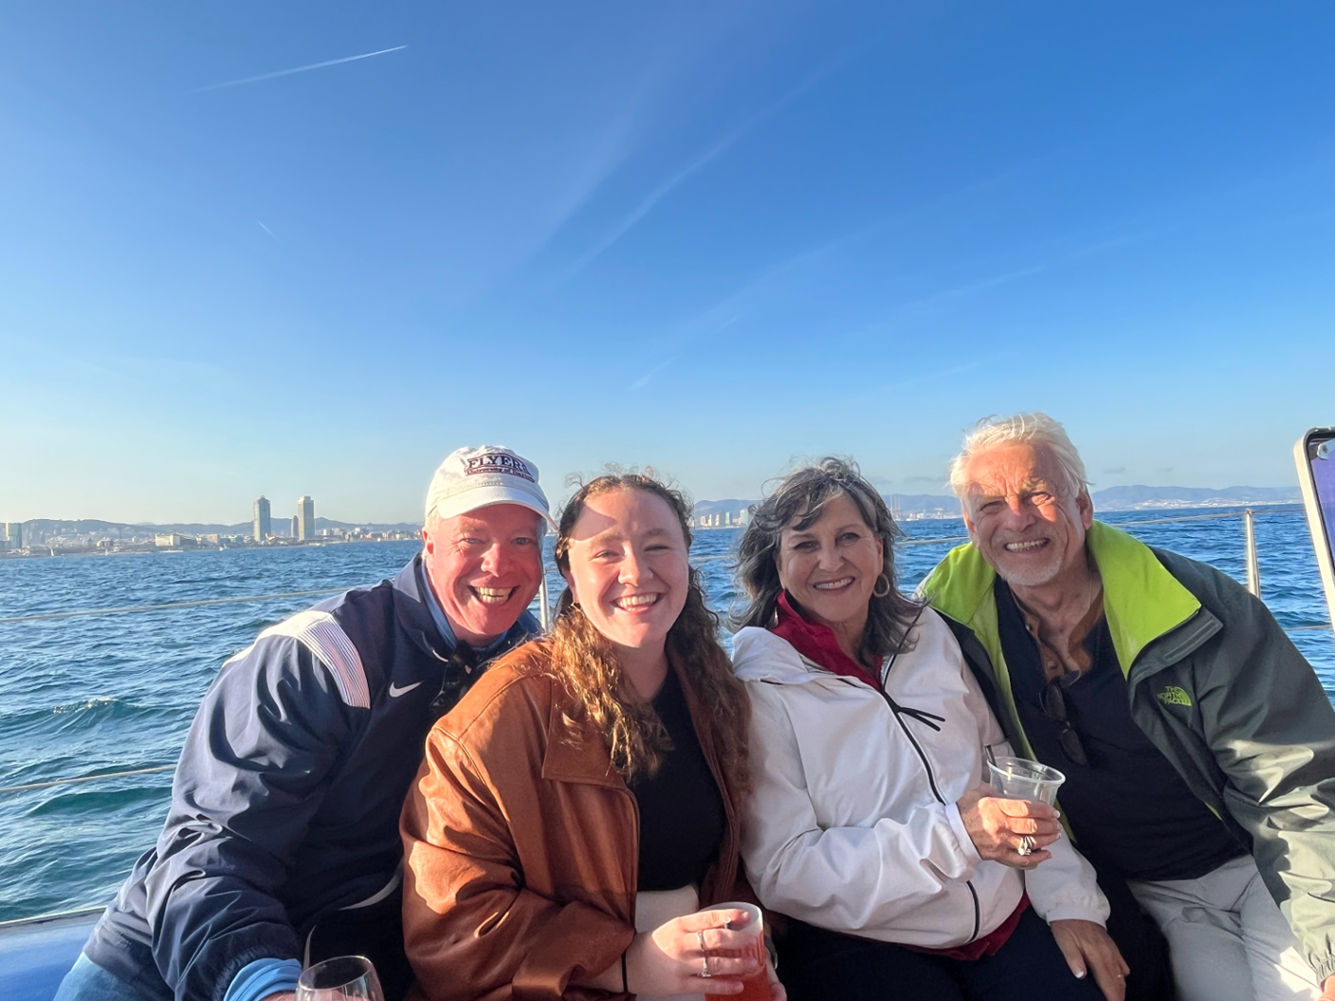 The family of Tara McLoughlin visiting her during Easter Break. Her father Brian (pictured on the left)  traveled with her to Barcelona with close family friends Jim and Su Lee (pictured on the right of Tara) all the way from Texas! This  photo was taken on a sunset boat cruise on the Mediterranean Sea. 